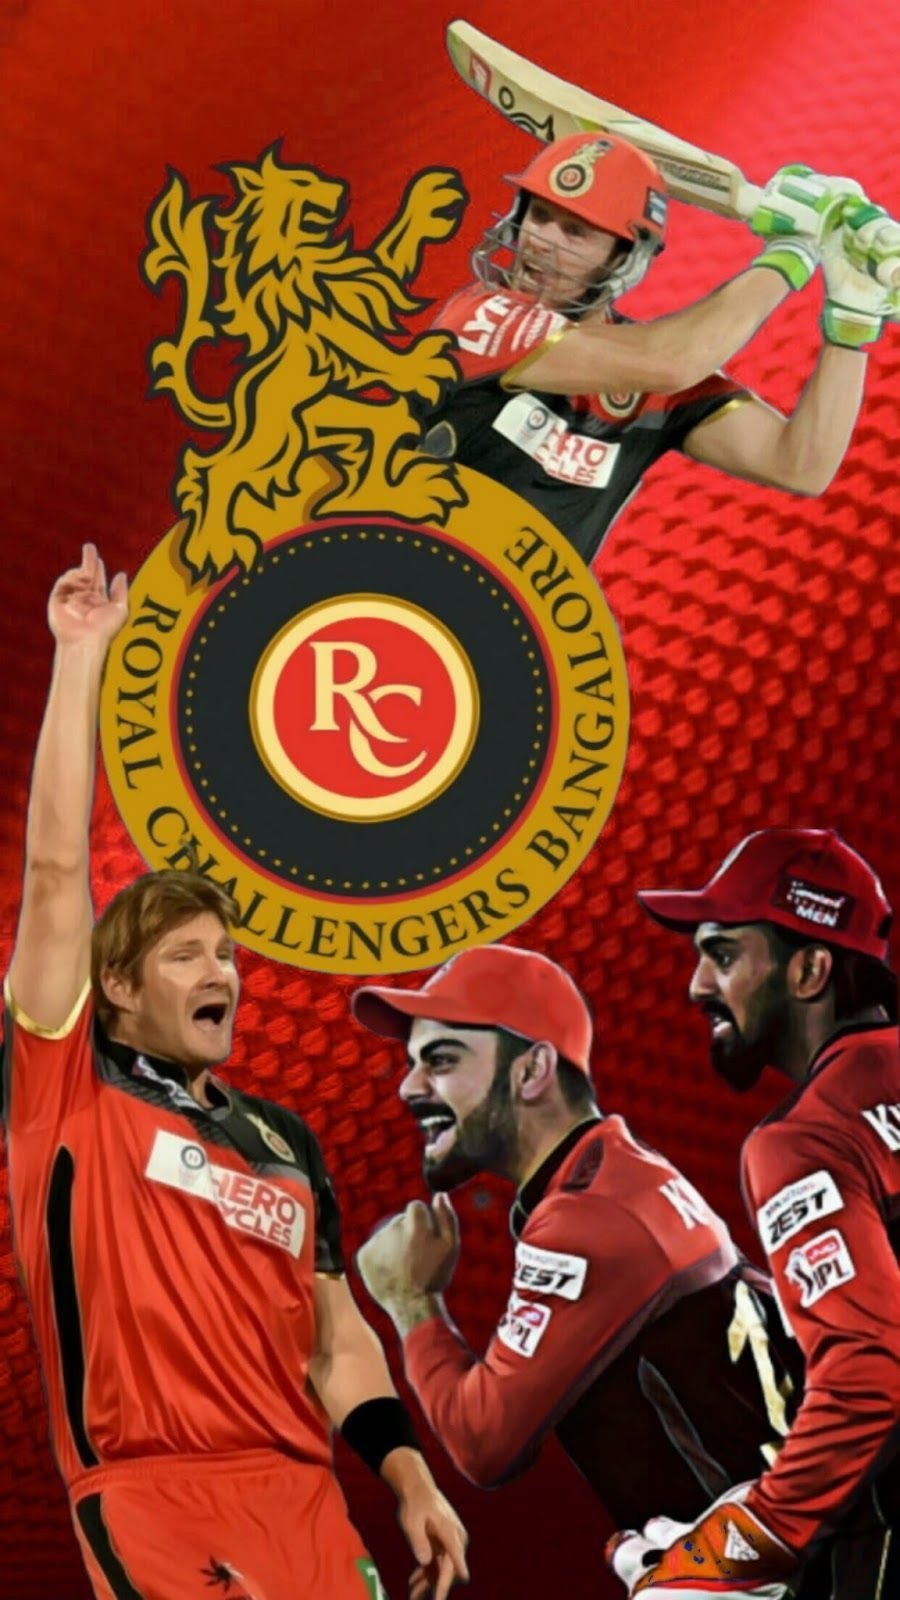 Royal challengers rcb logo for mobile wallpapers